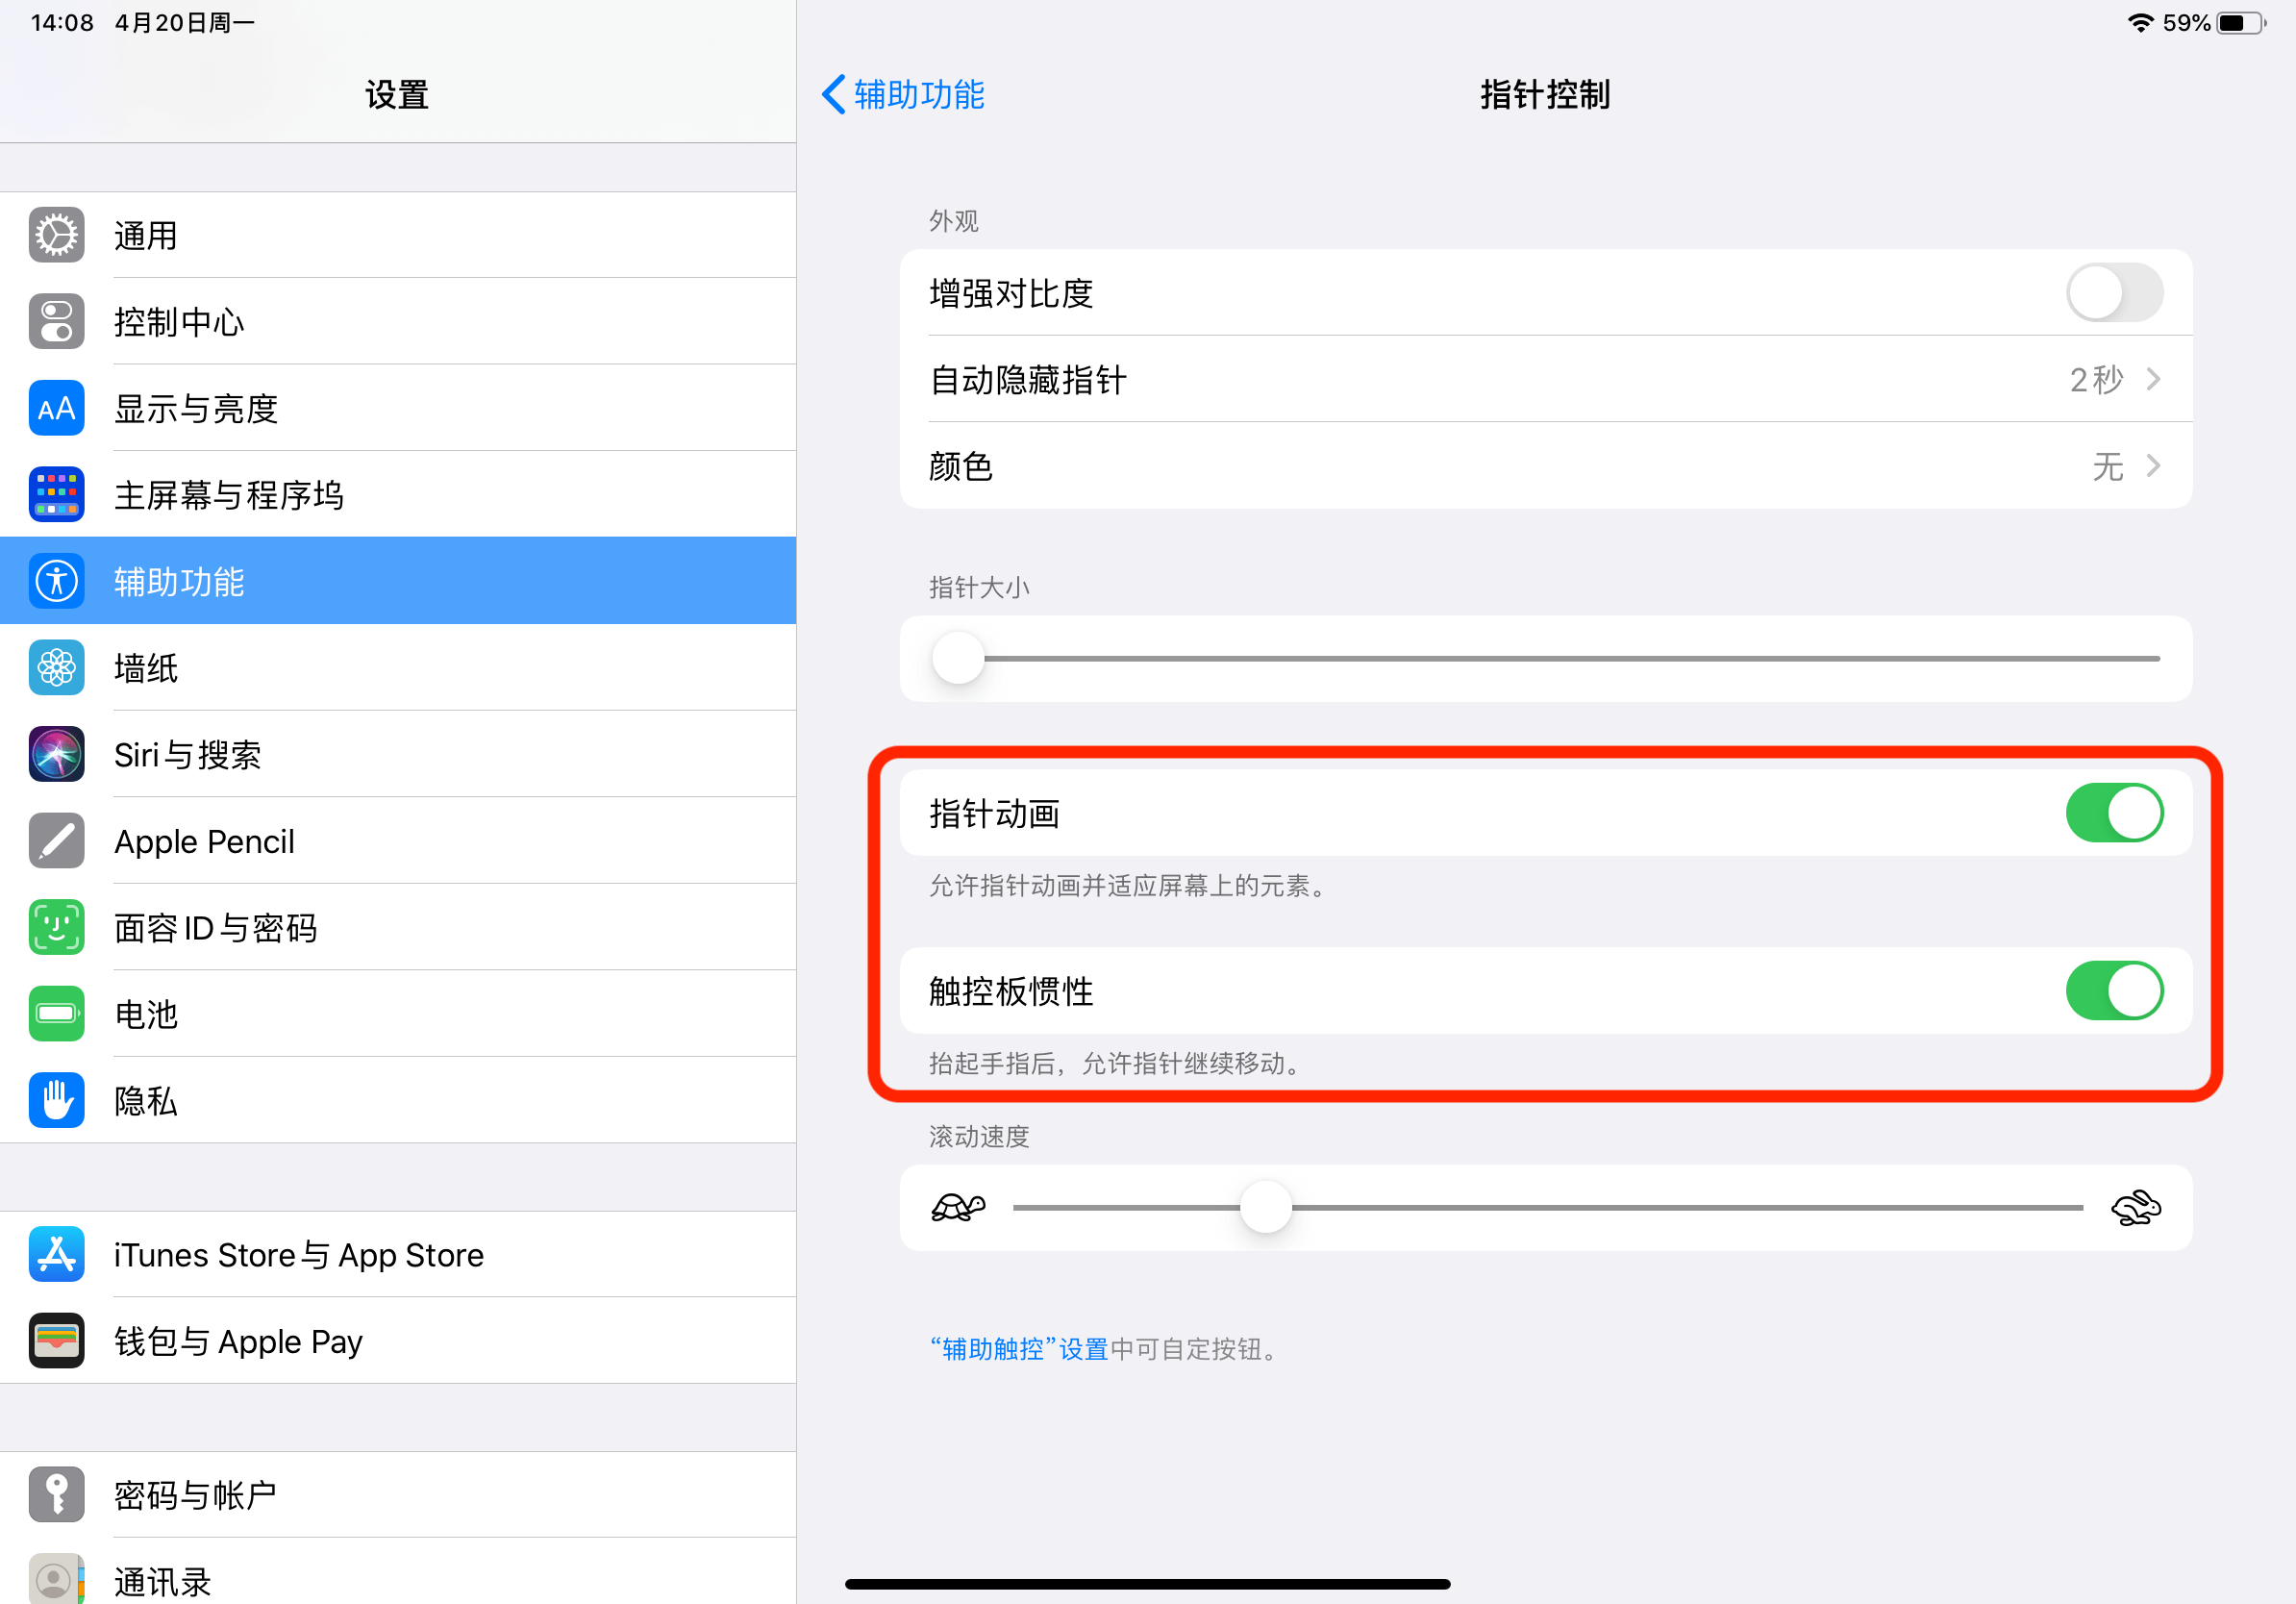 Two settings in accessibility, pointer control